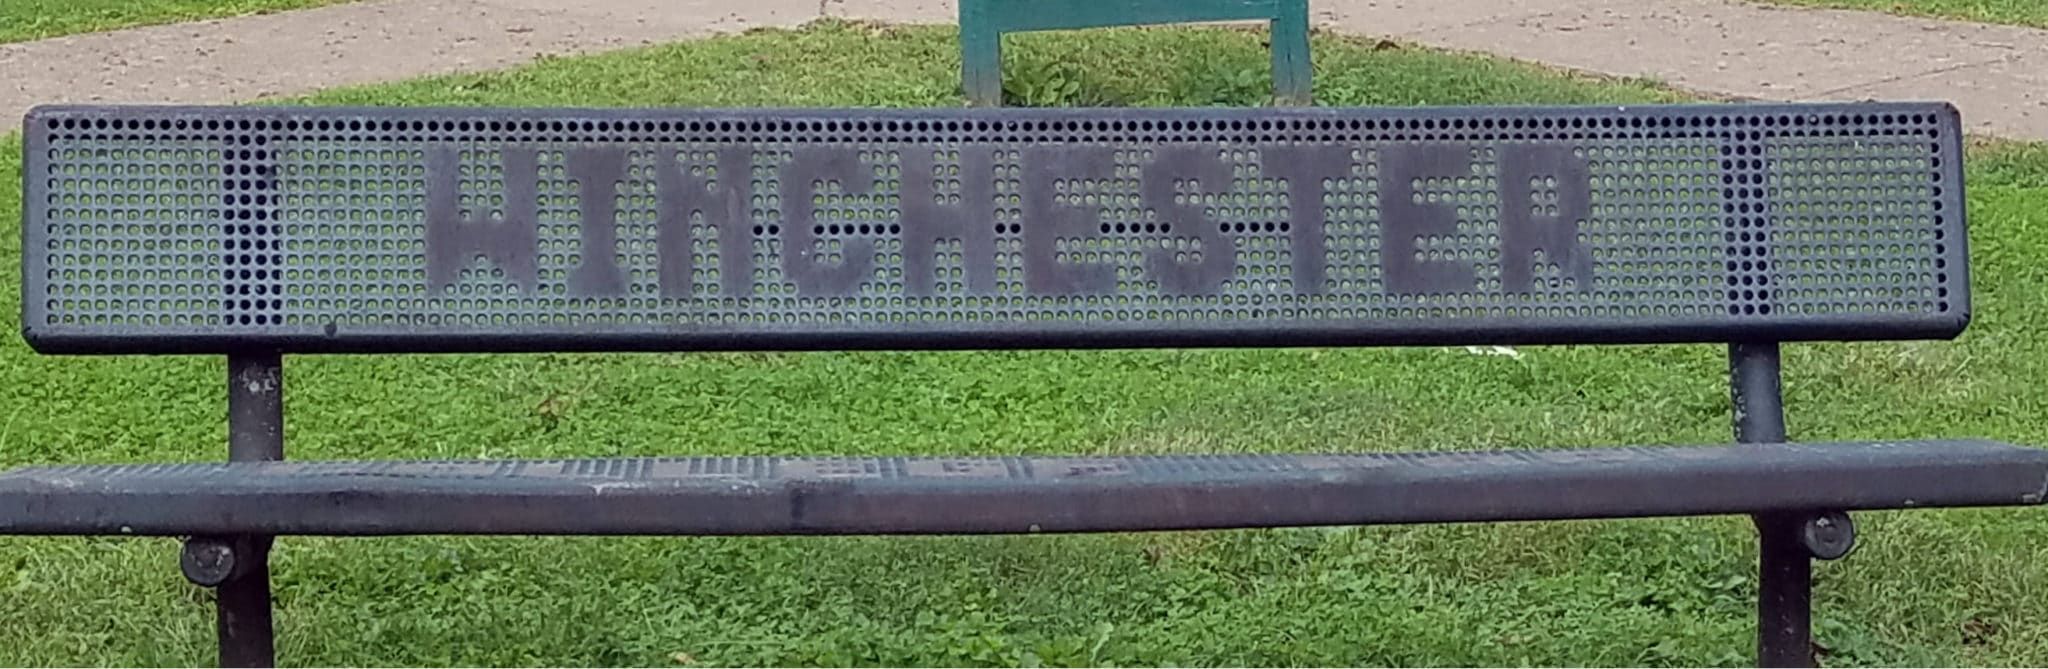 bench-in-the-park-across-from-Winchester-Clark-County-Recreation-Center